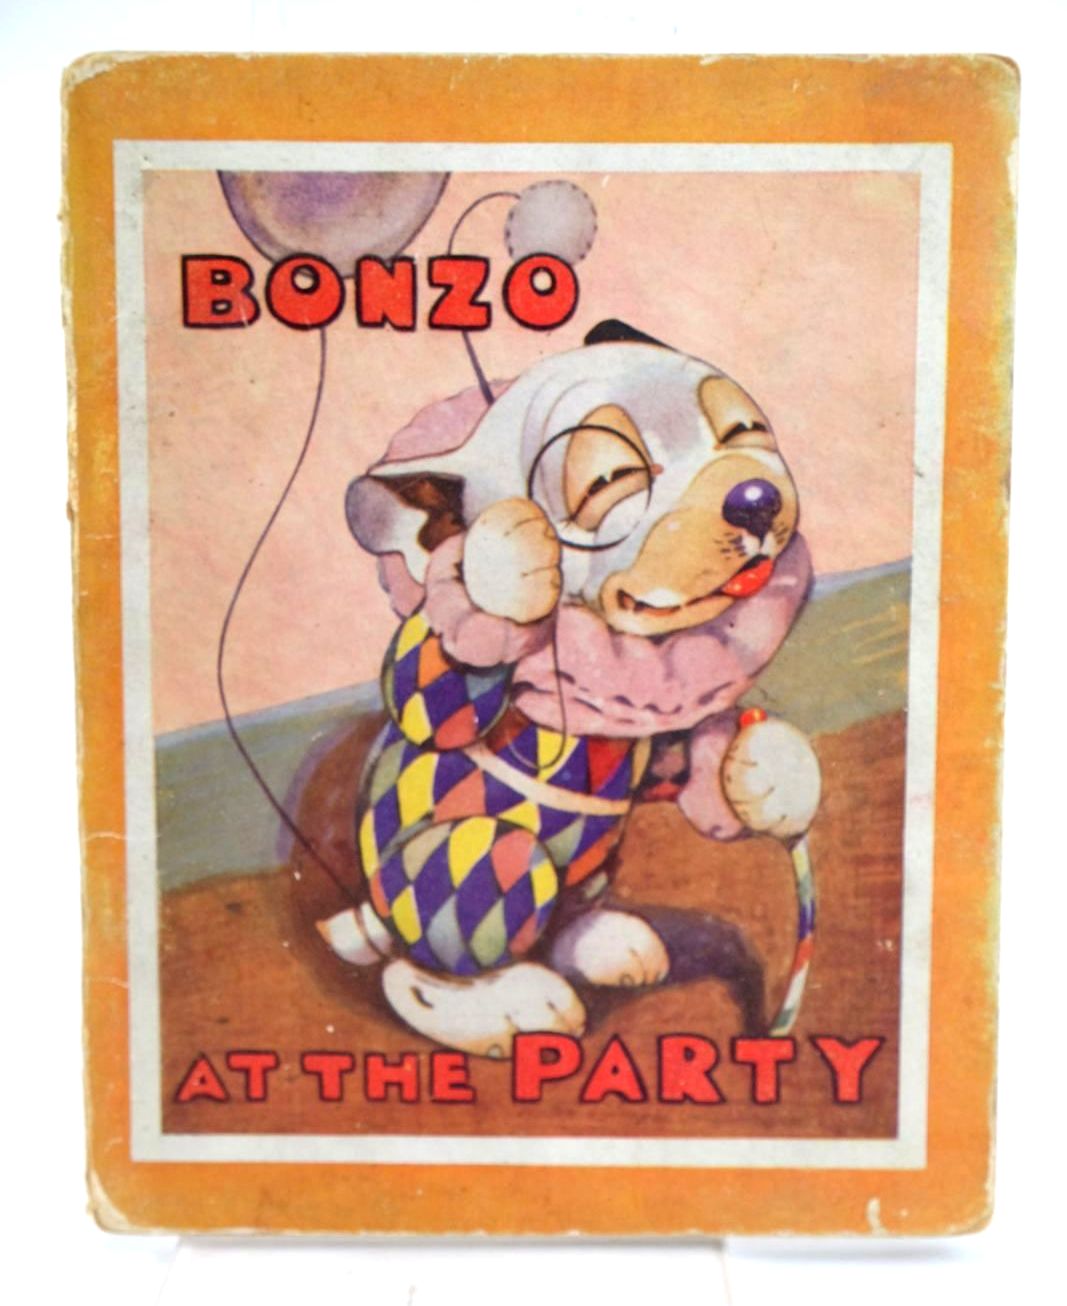 Photo of BONZO AT THE PARTY written by Studdy, G.E.
Jellicoe, George illustrated by Studdy, G.E. published by John Swain & Son Limited (STOCK CODE: 1319260)  for sale by Stella & Rose's Books